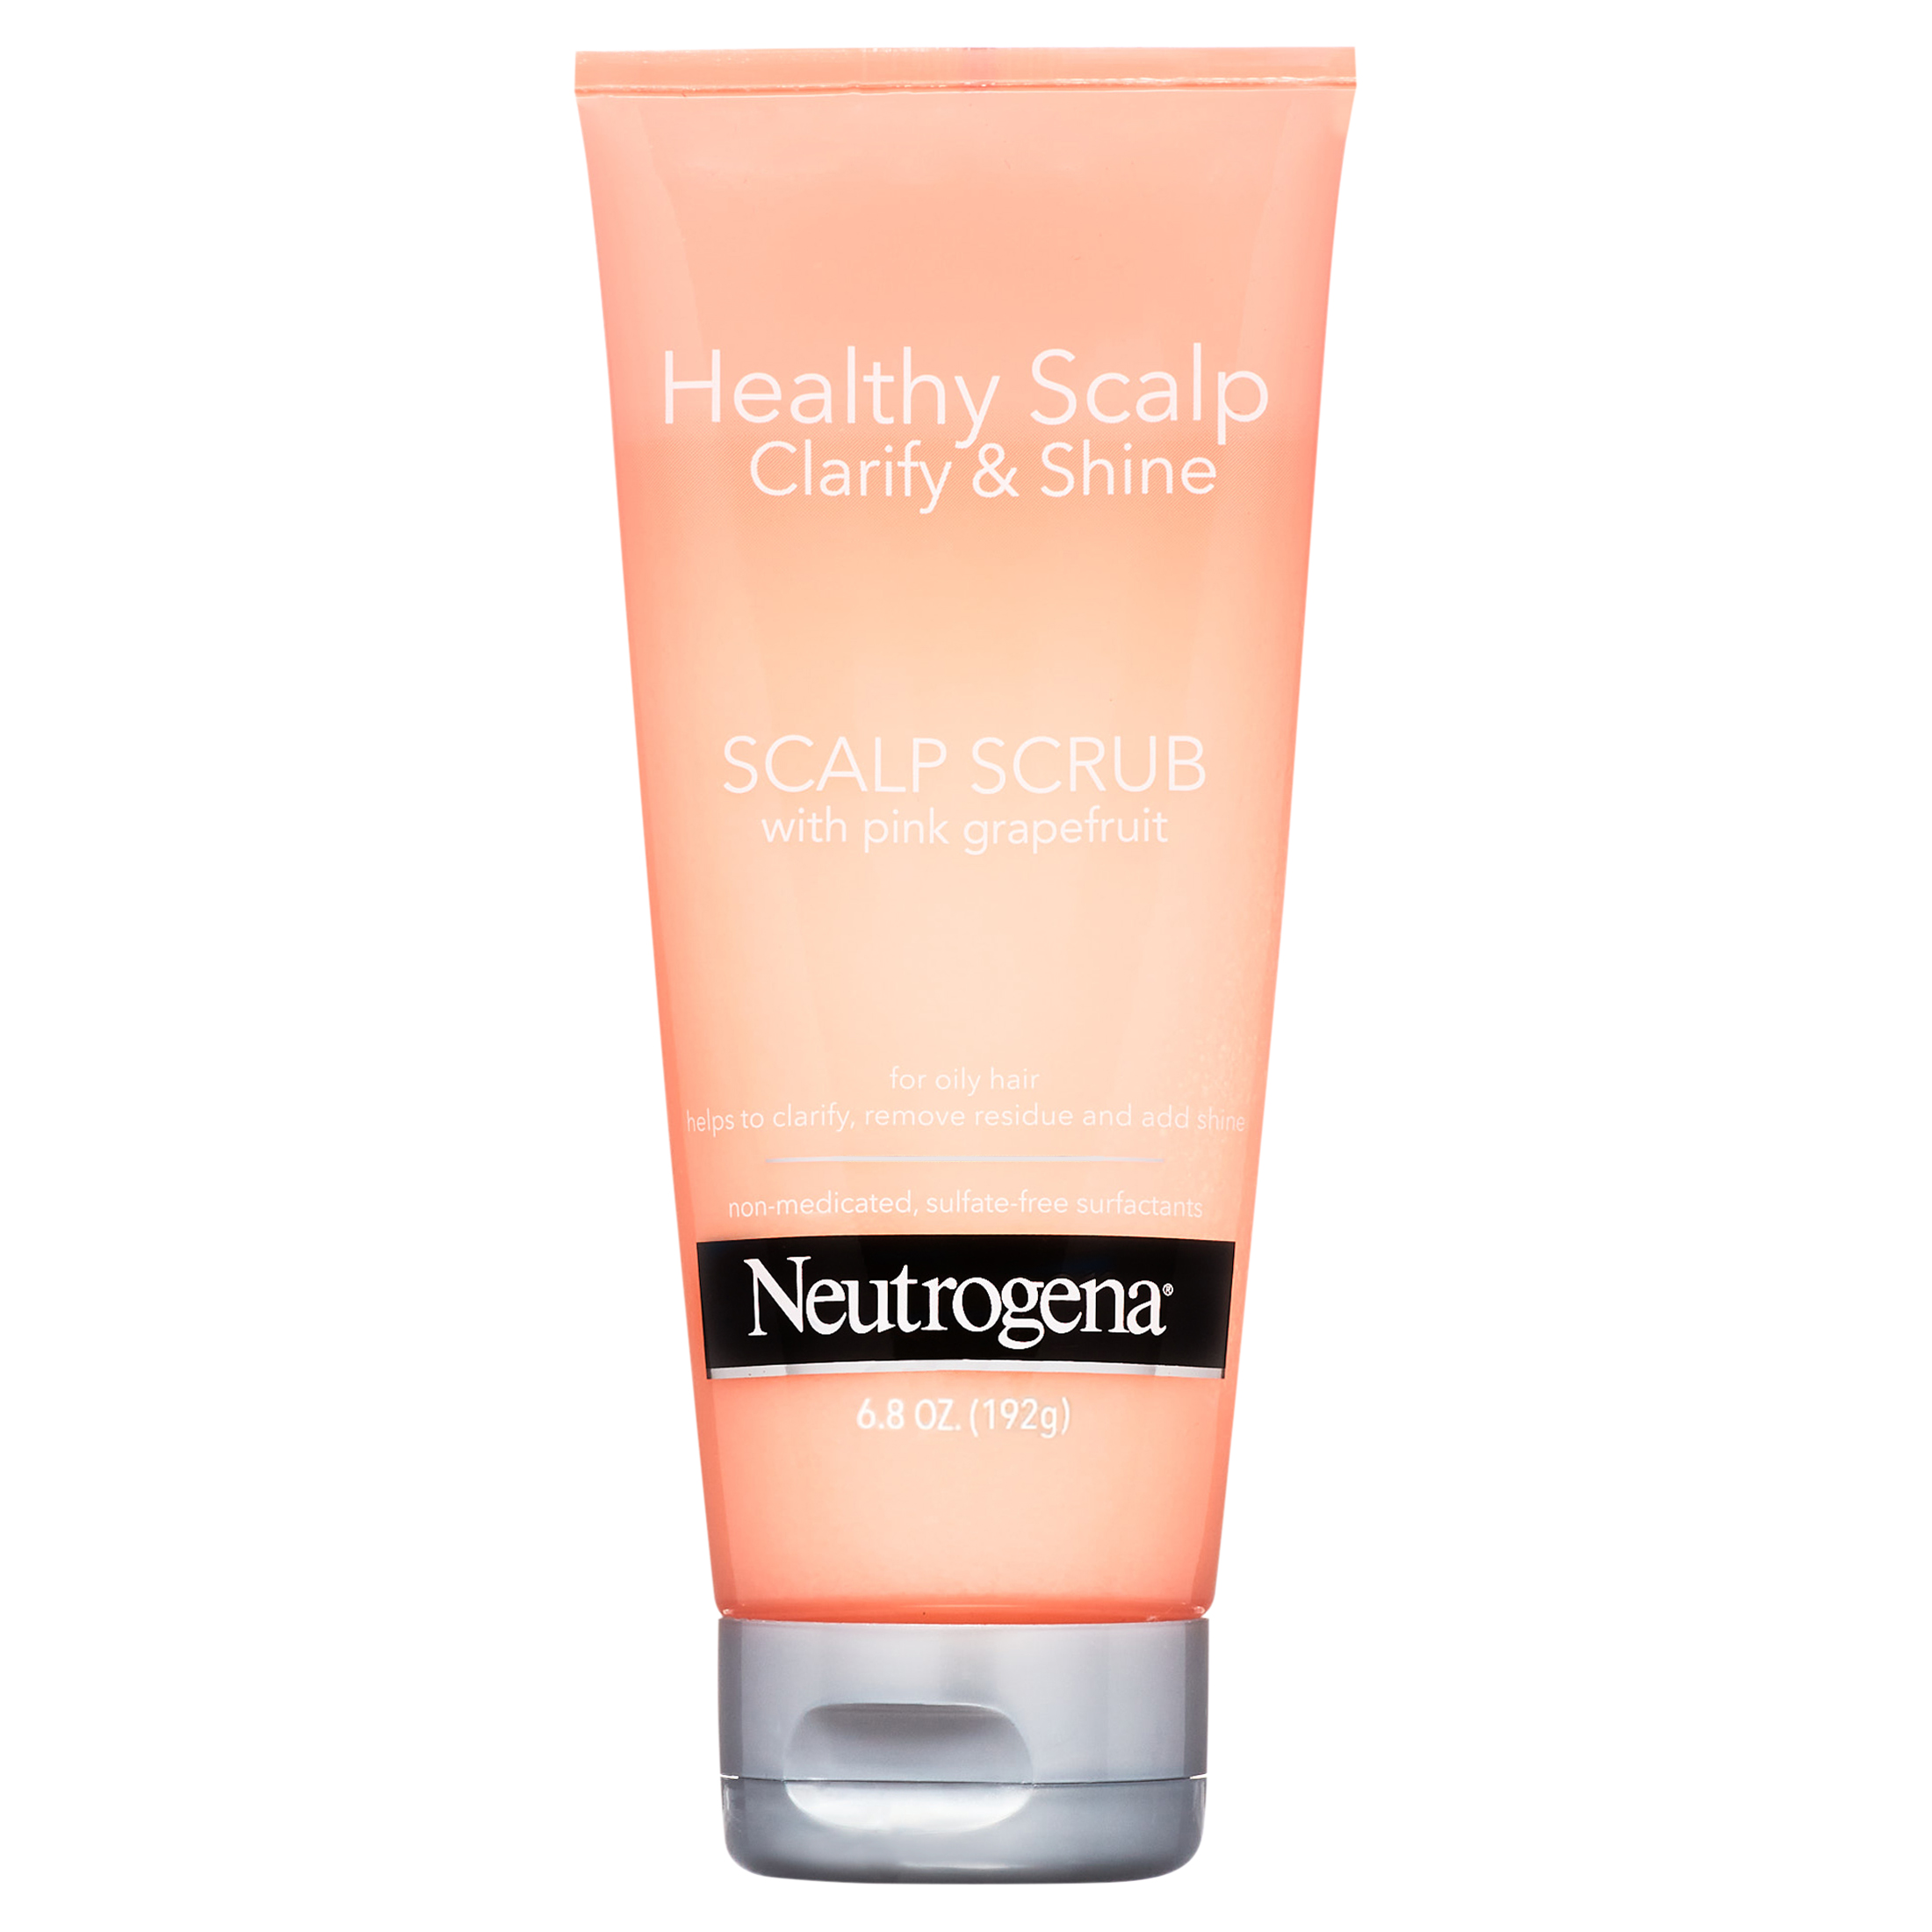 Neutrogena Healthy Scalp Clarify and Shine Scalp Scrub with Pink Grapefruit, for Exfoliating, Clarifying, Cleaner Hair, Hair Mask, Vitamin C, 6.8 fl. oz. - image 1 of 10